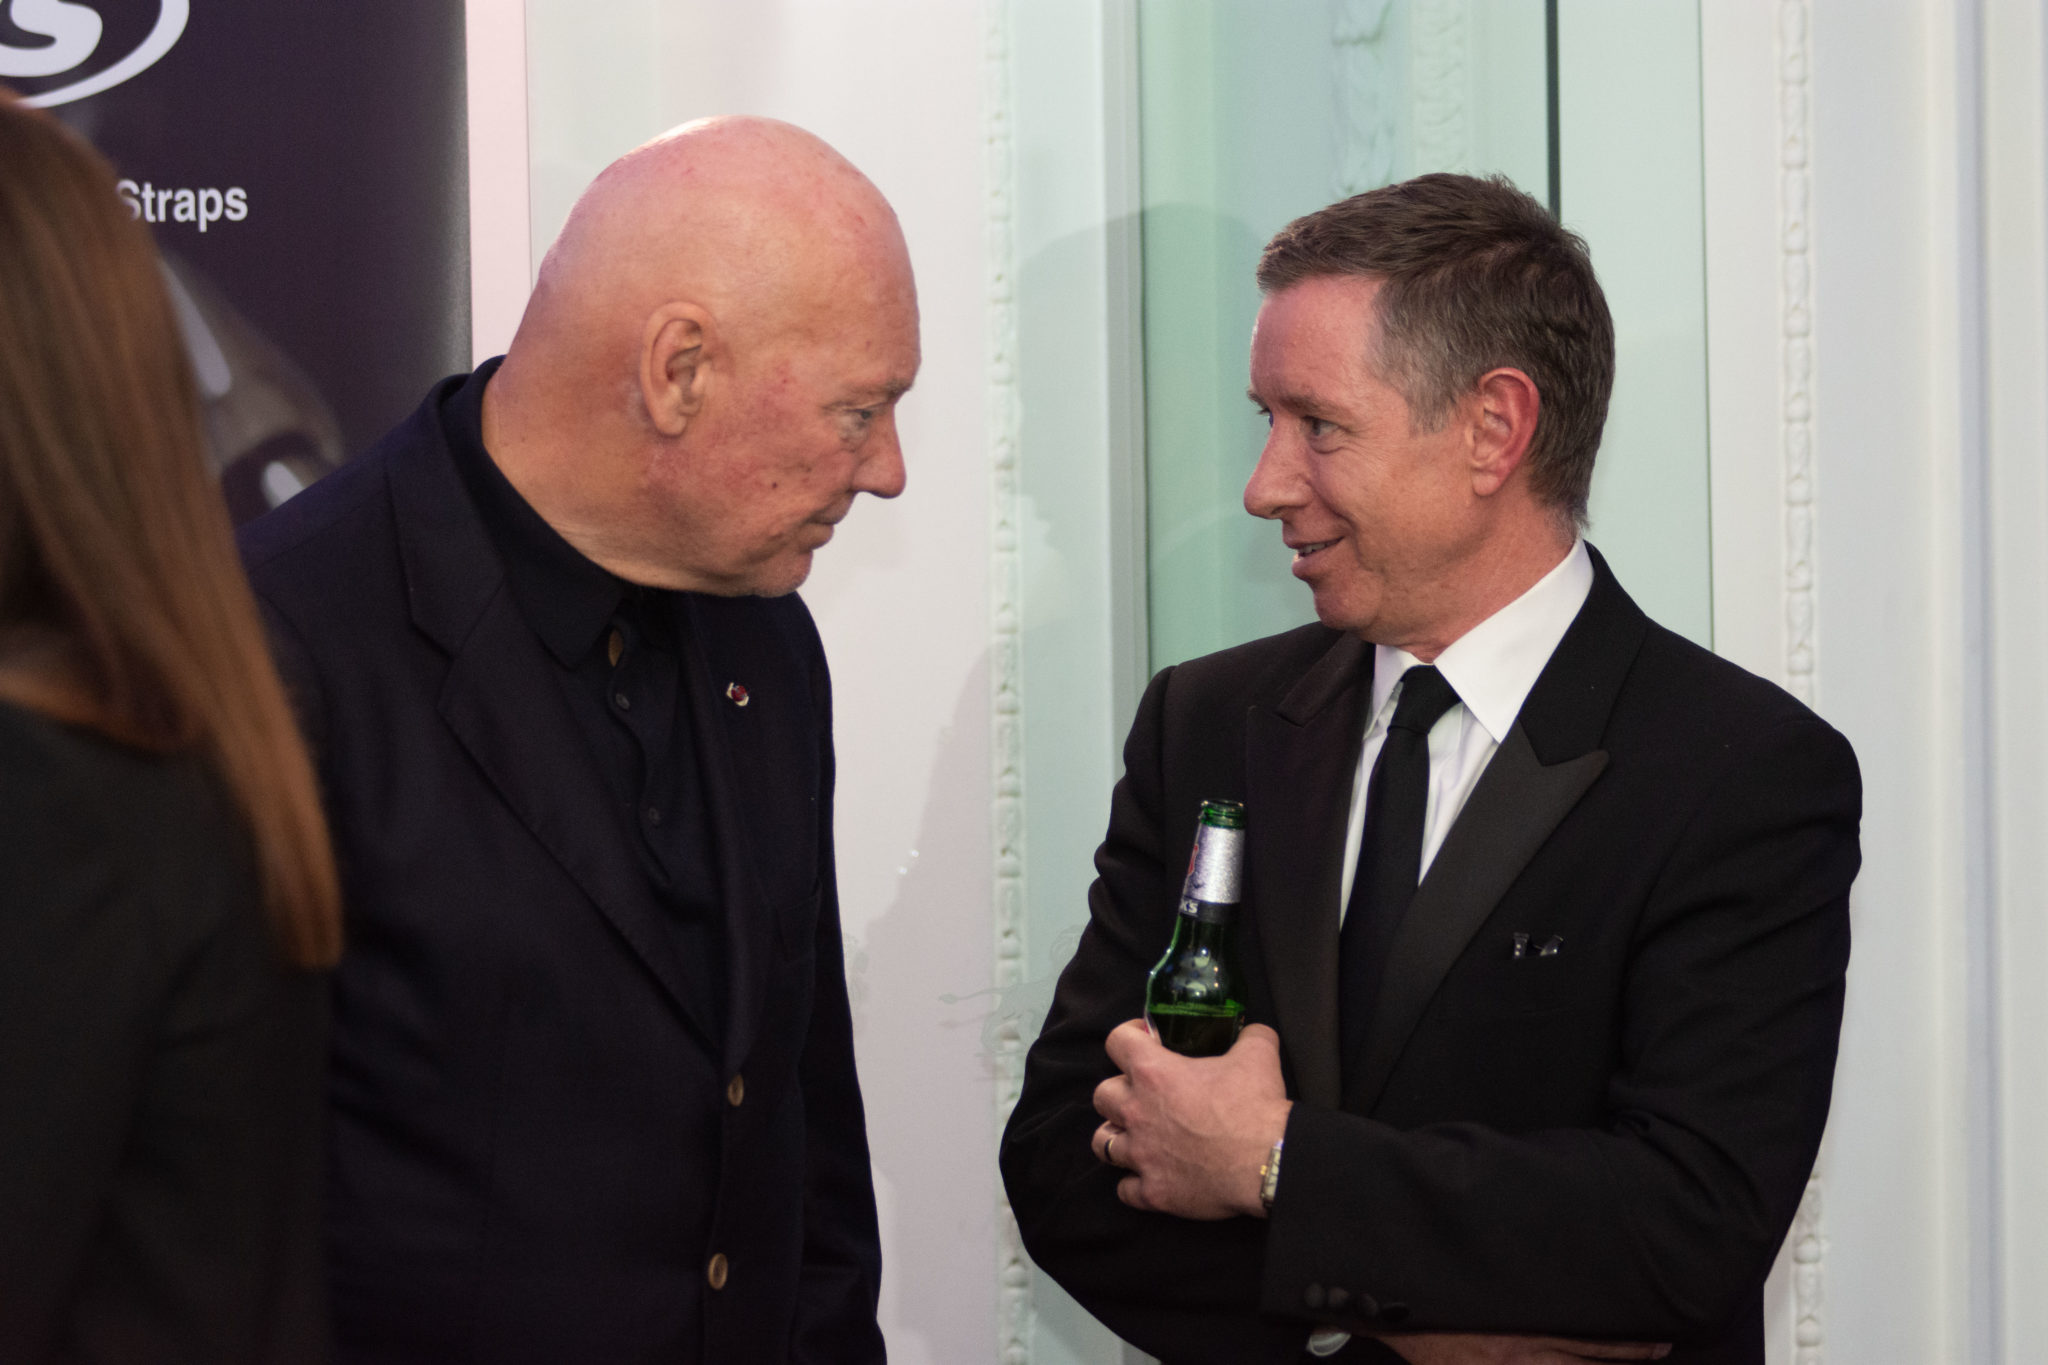 A Conversation With Tag Heuer and Hublot CEO Jean Claude Biver